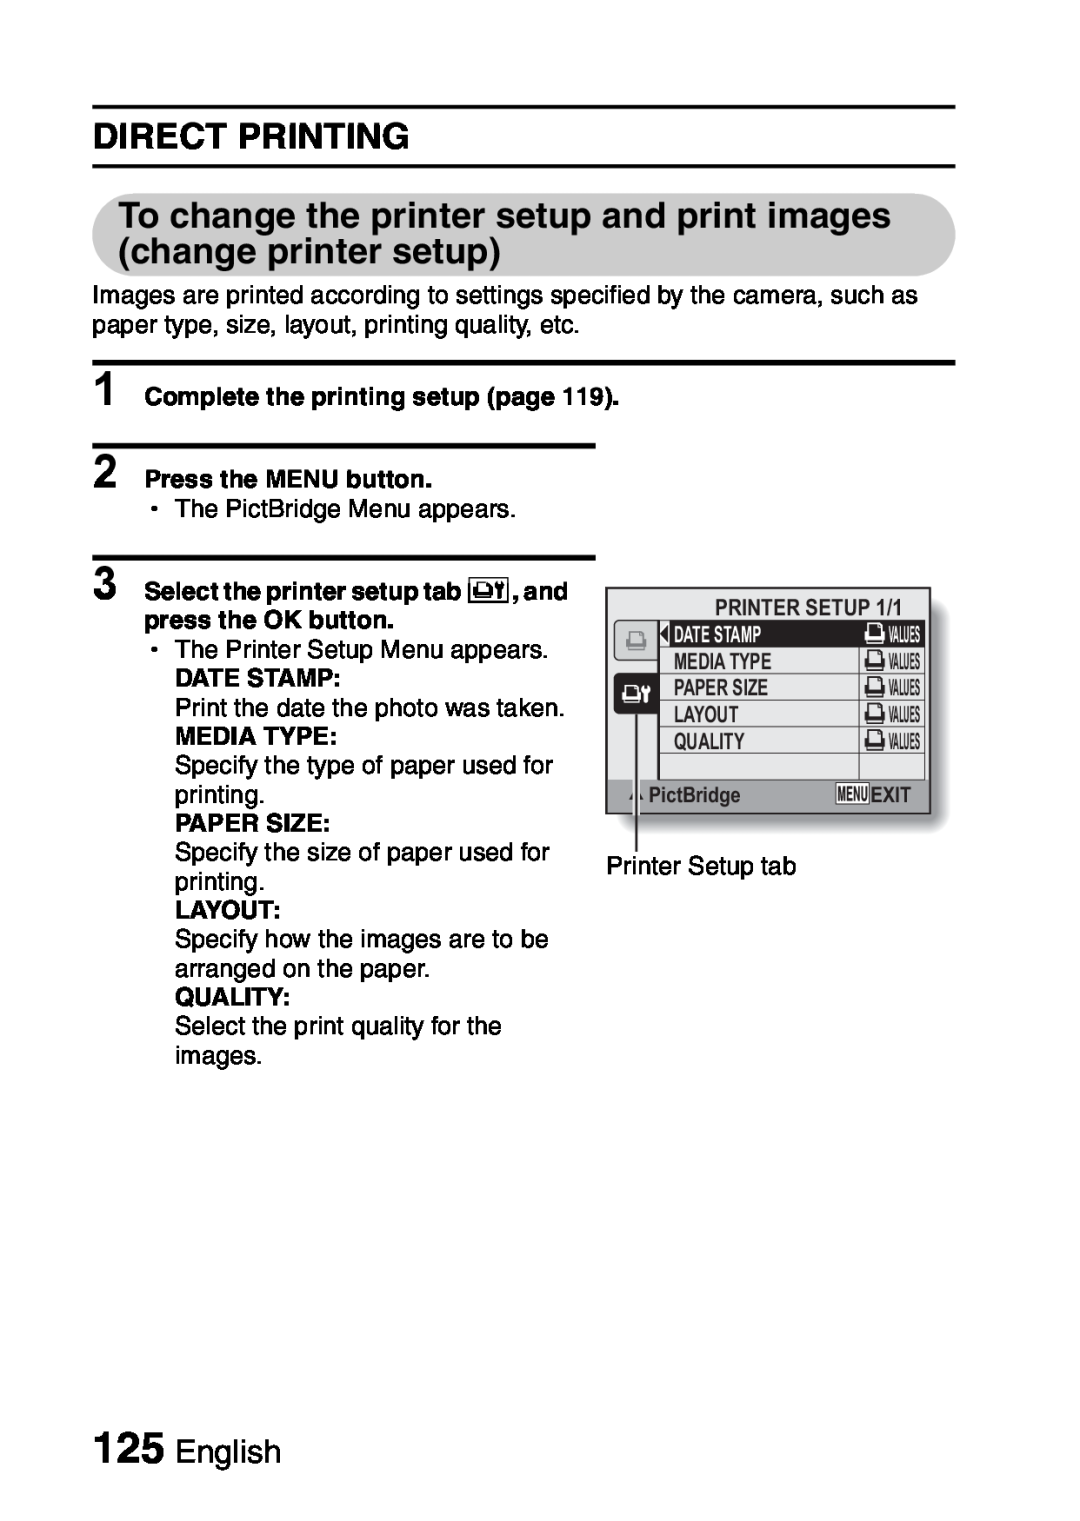 Samsung R50 Direct Printing, To change the printer setup and print images change printer setup, English, Date Stamp 